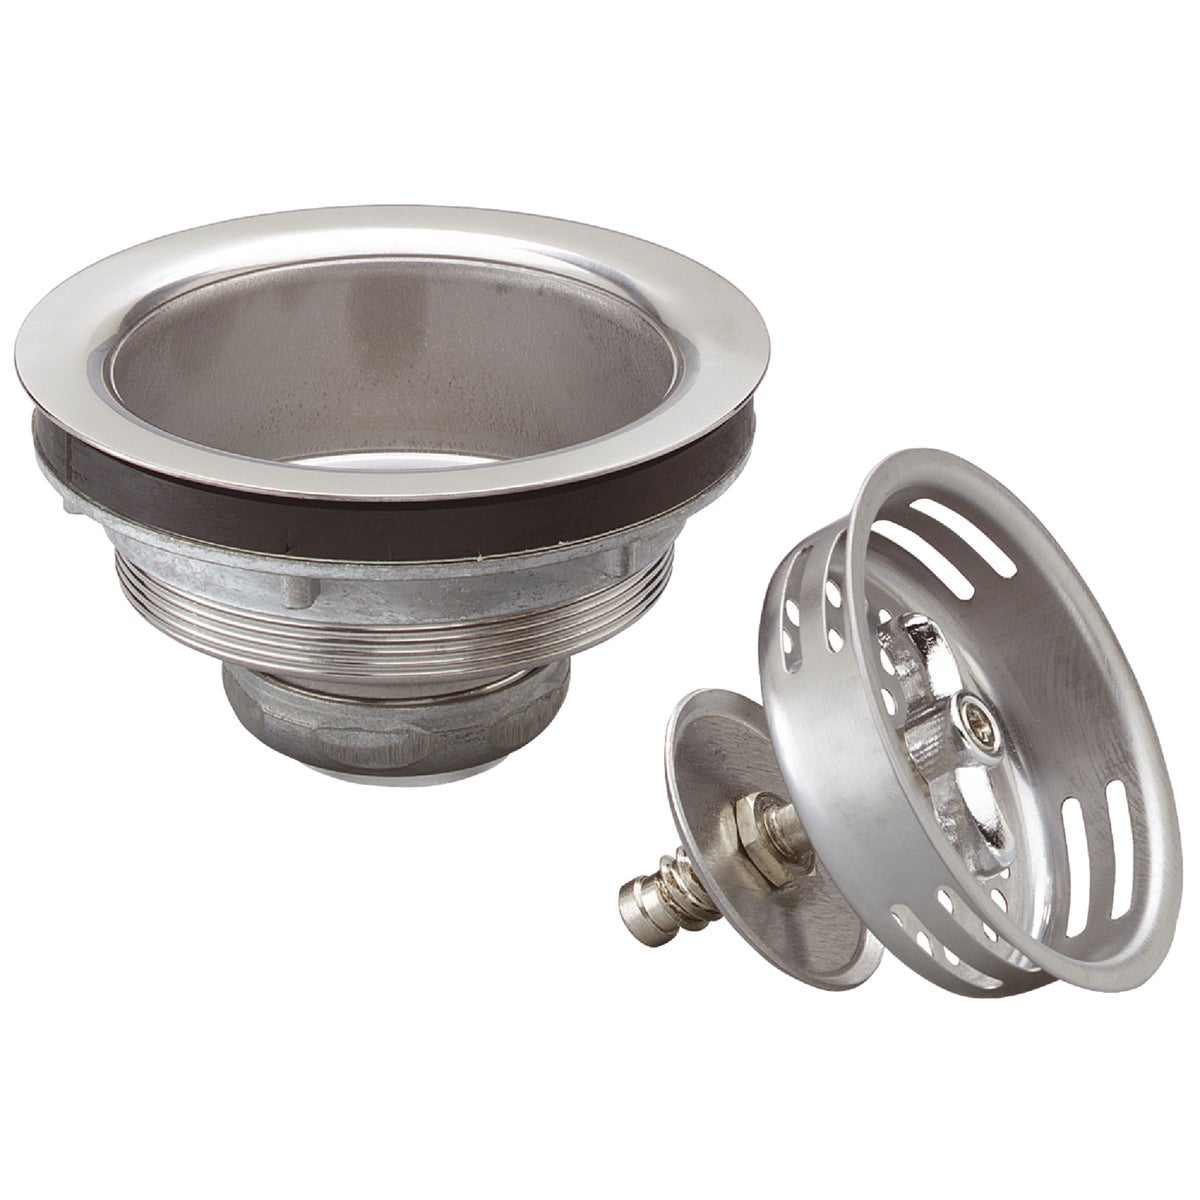 Item 444413, Stainless steel strainer assembly turn 2 seal. Stainless steel body.